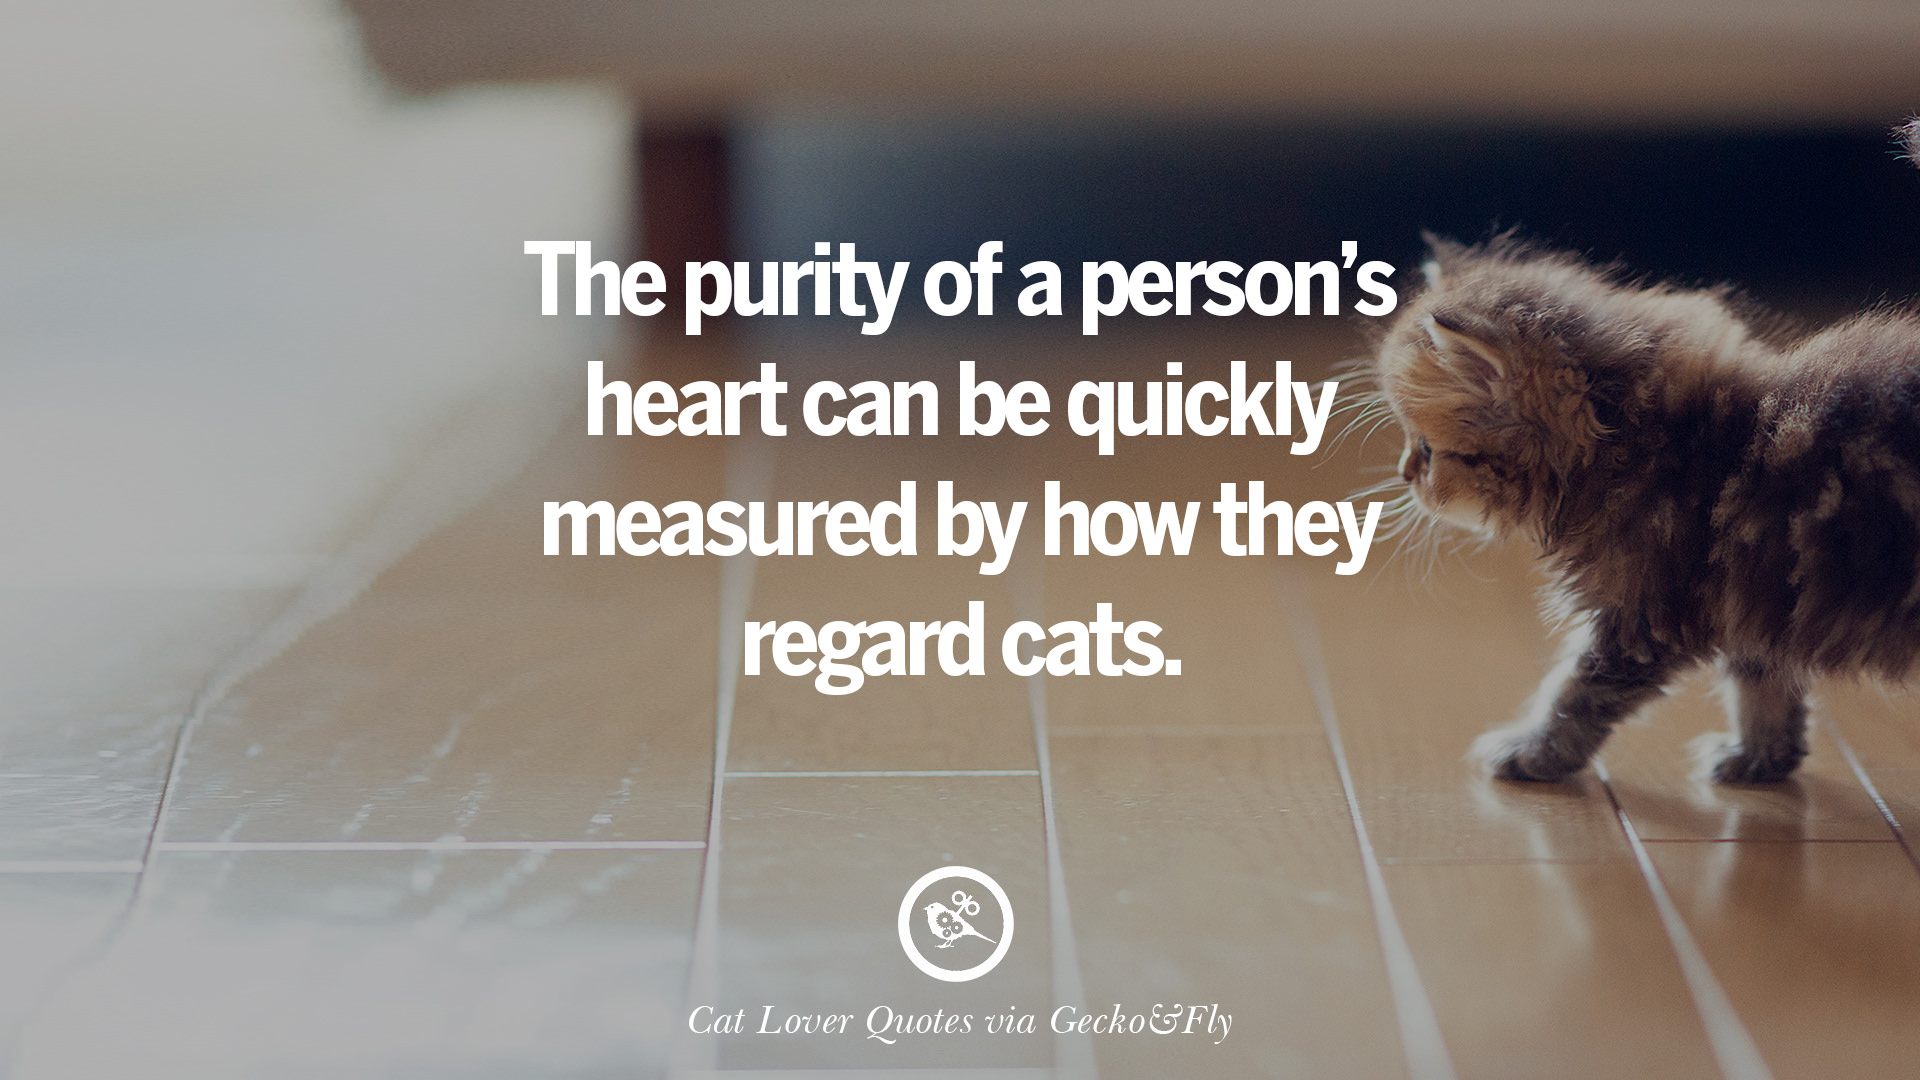 25 Cute Cat Images With Quotes For Crazy Cat Ladies, Gentlemen And Lovers